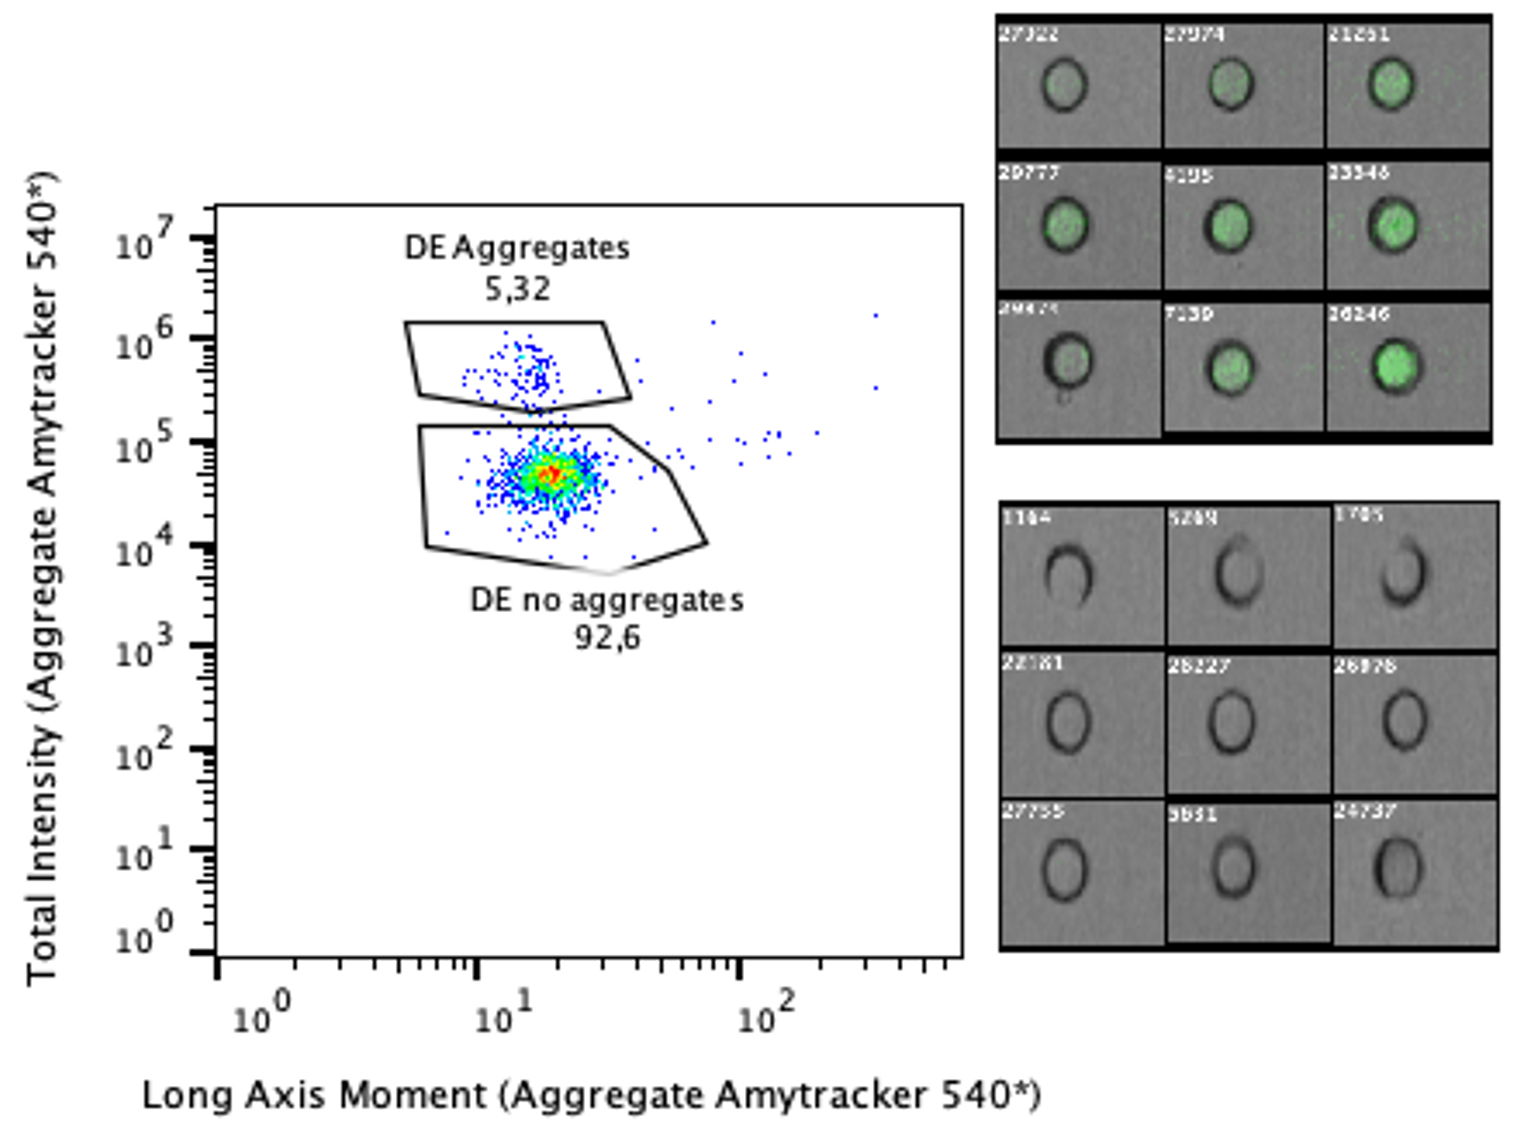 Quantification of the amount of droplets that contain protein aggregates through FACS. The data was recorded with BD FACSDiscoverTM S8 Cell Sorter and analyzed using FlowJo.